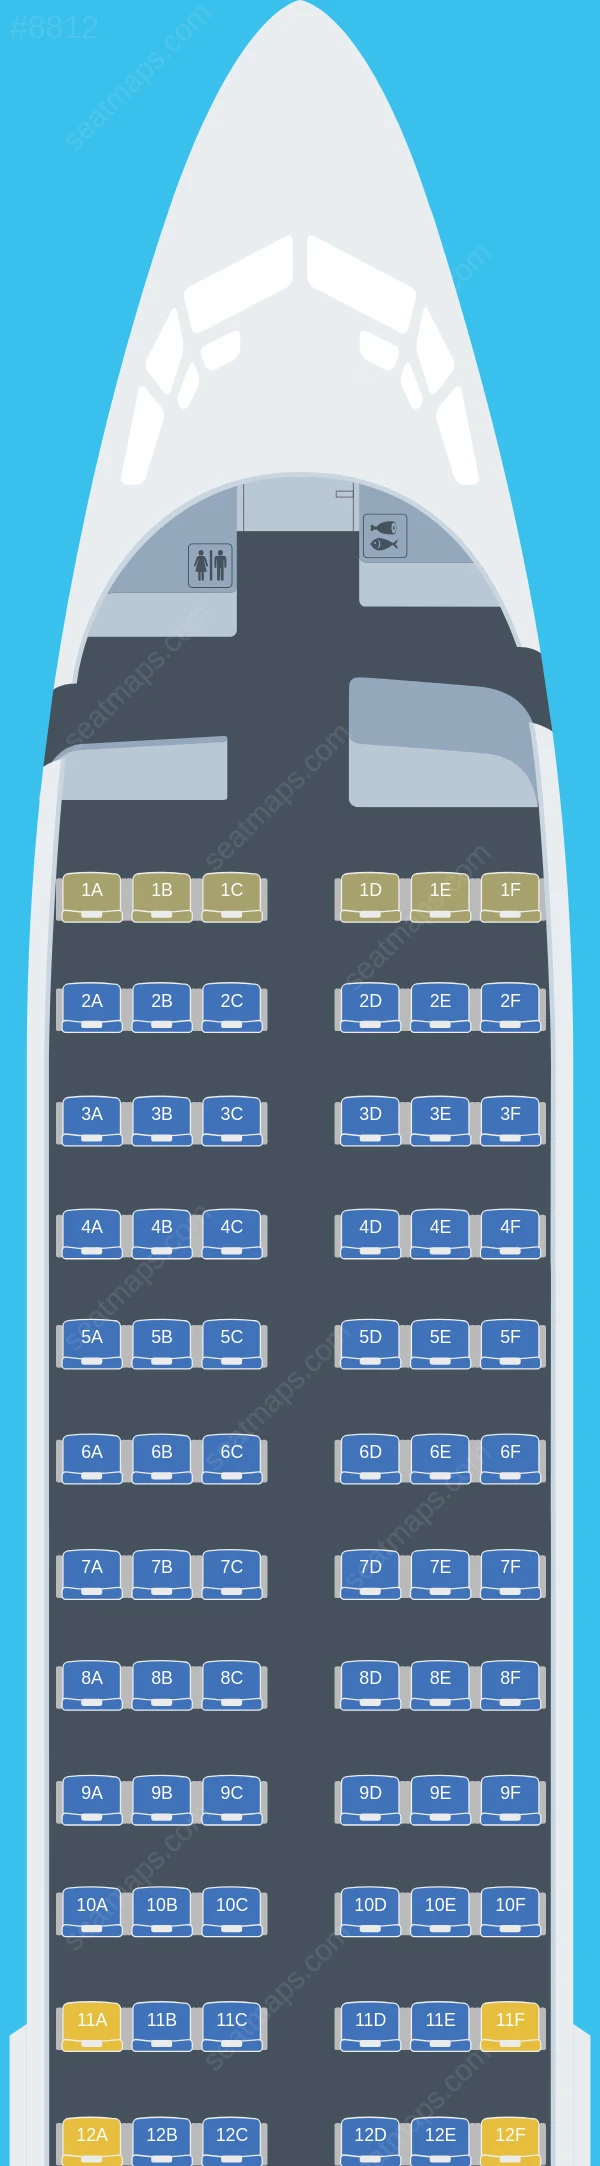 GetJet Airlines Boeing 737-400 seatmap preview